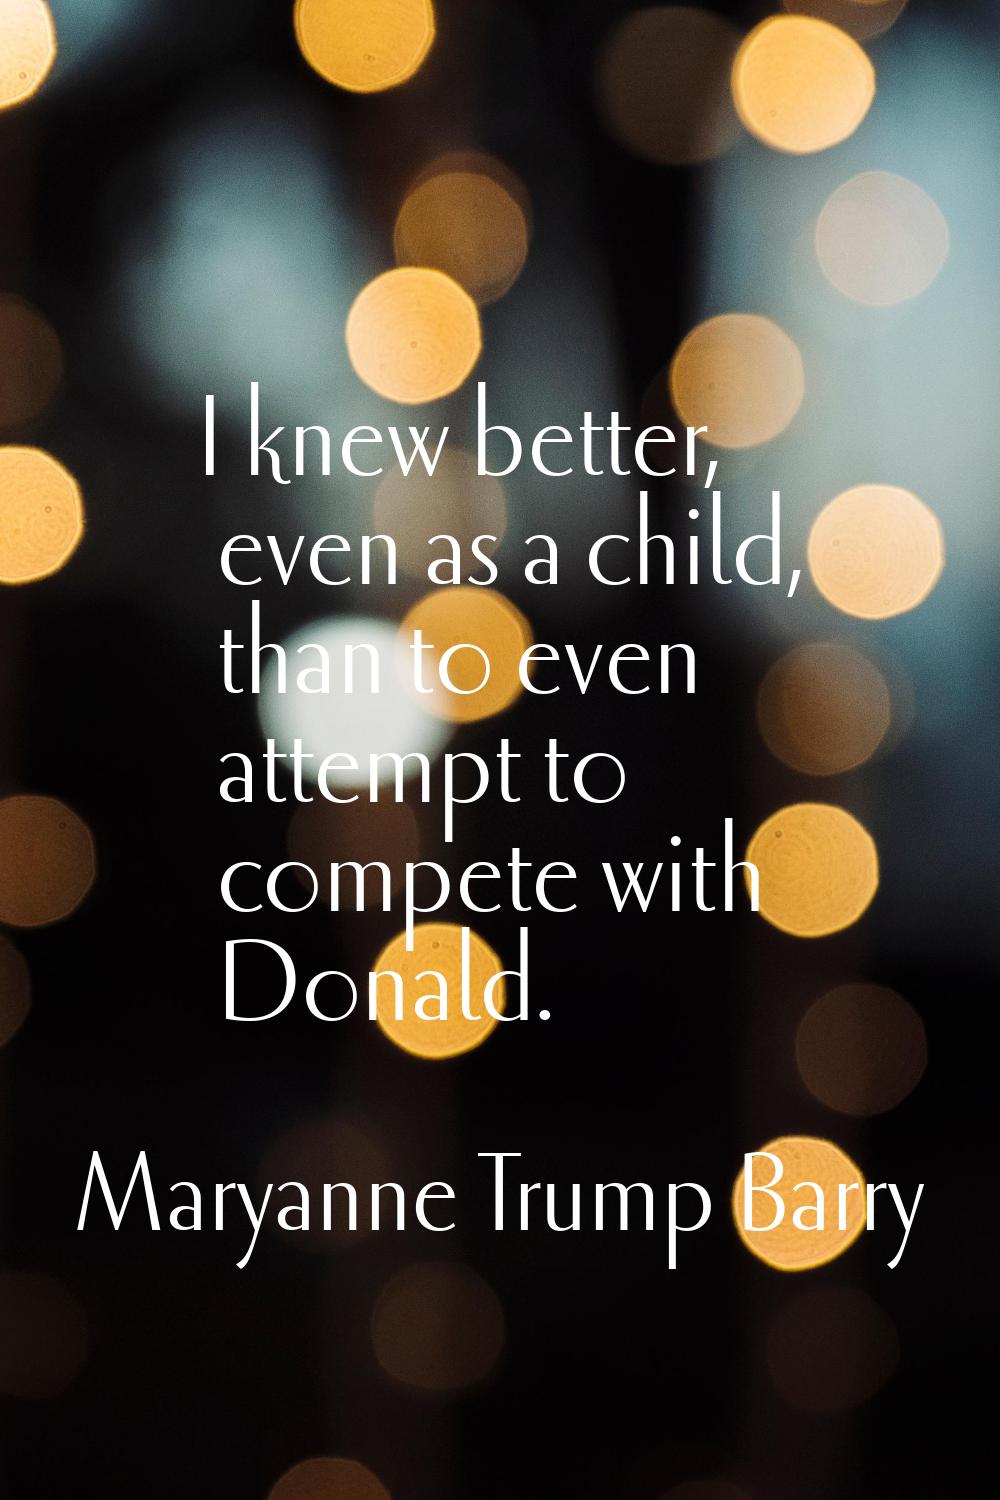 I knew better, even as a child, than to even attempt to compete with Donald.